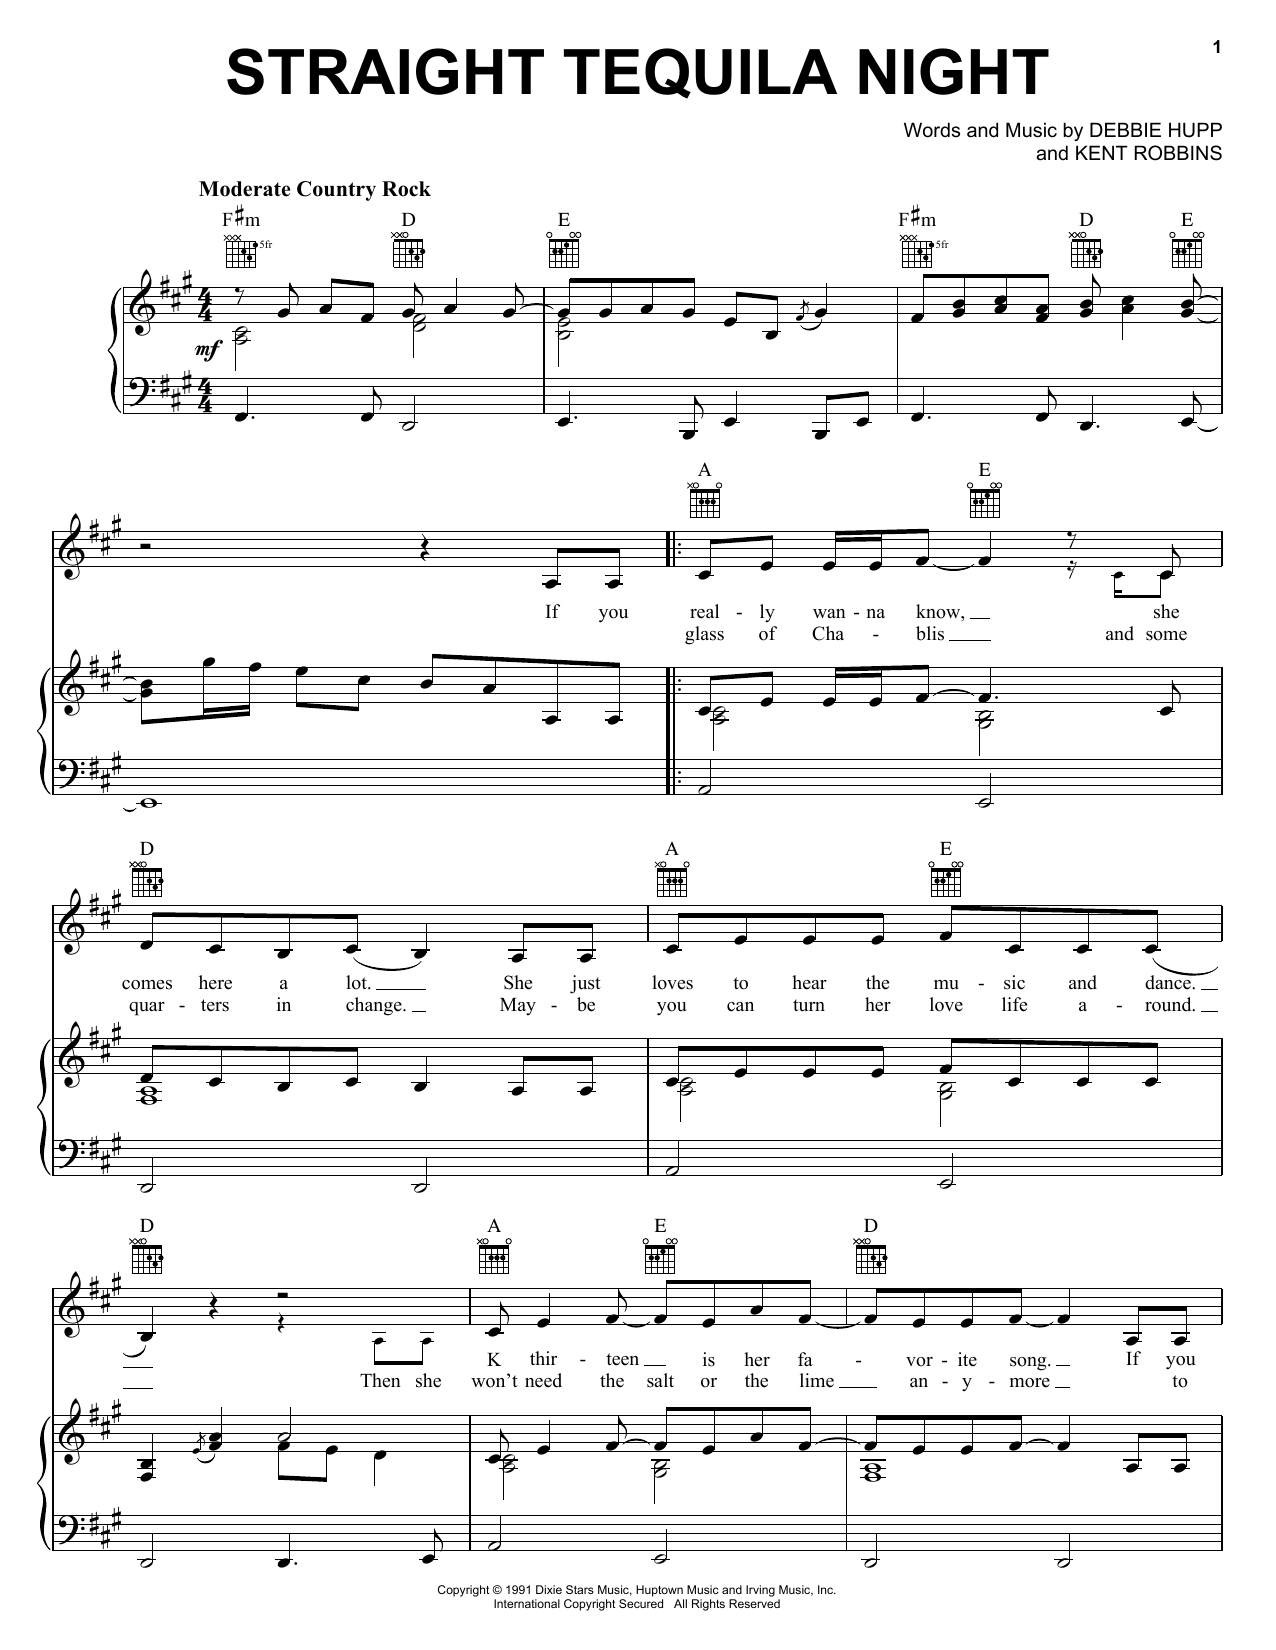 Download John Anderson Straight Tequila Night Sheet Music